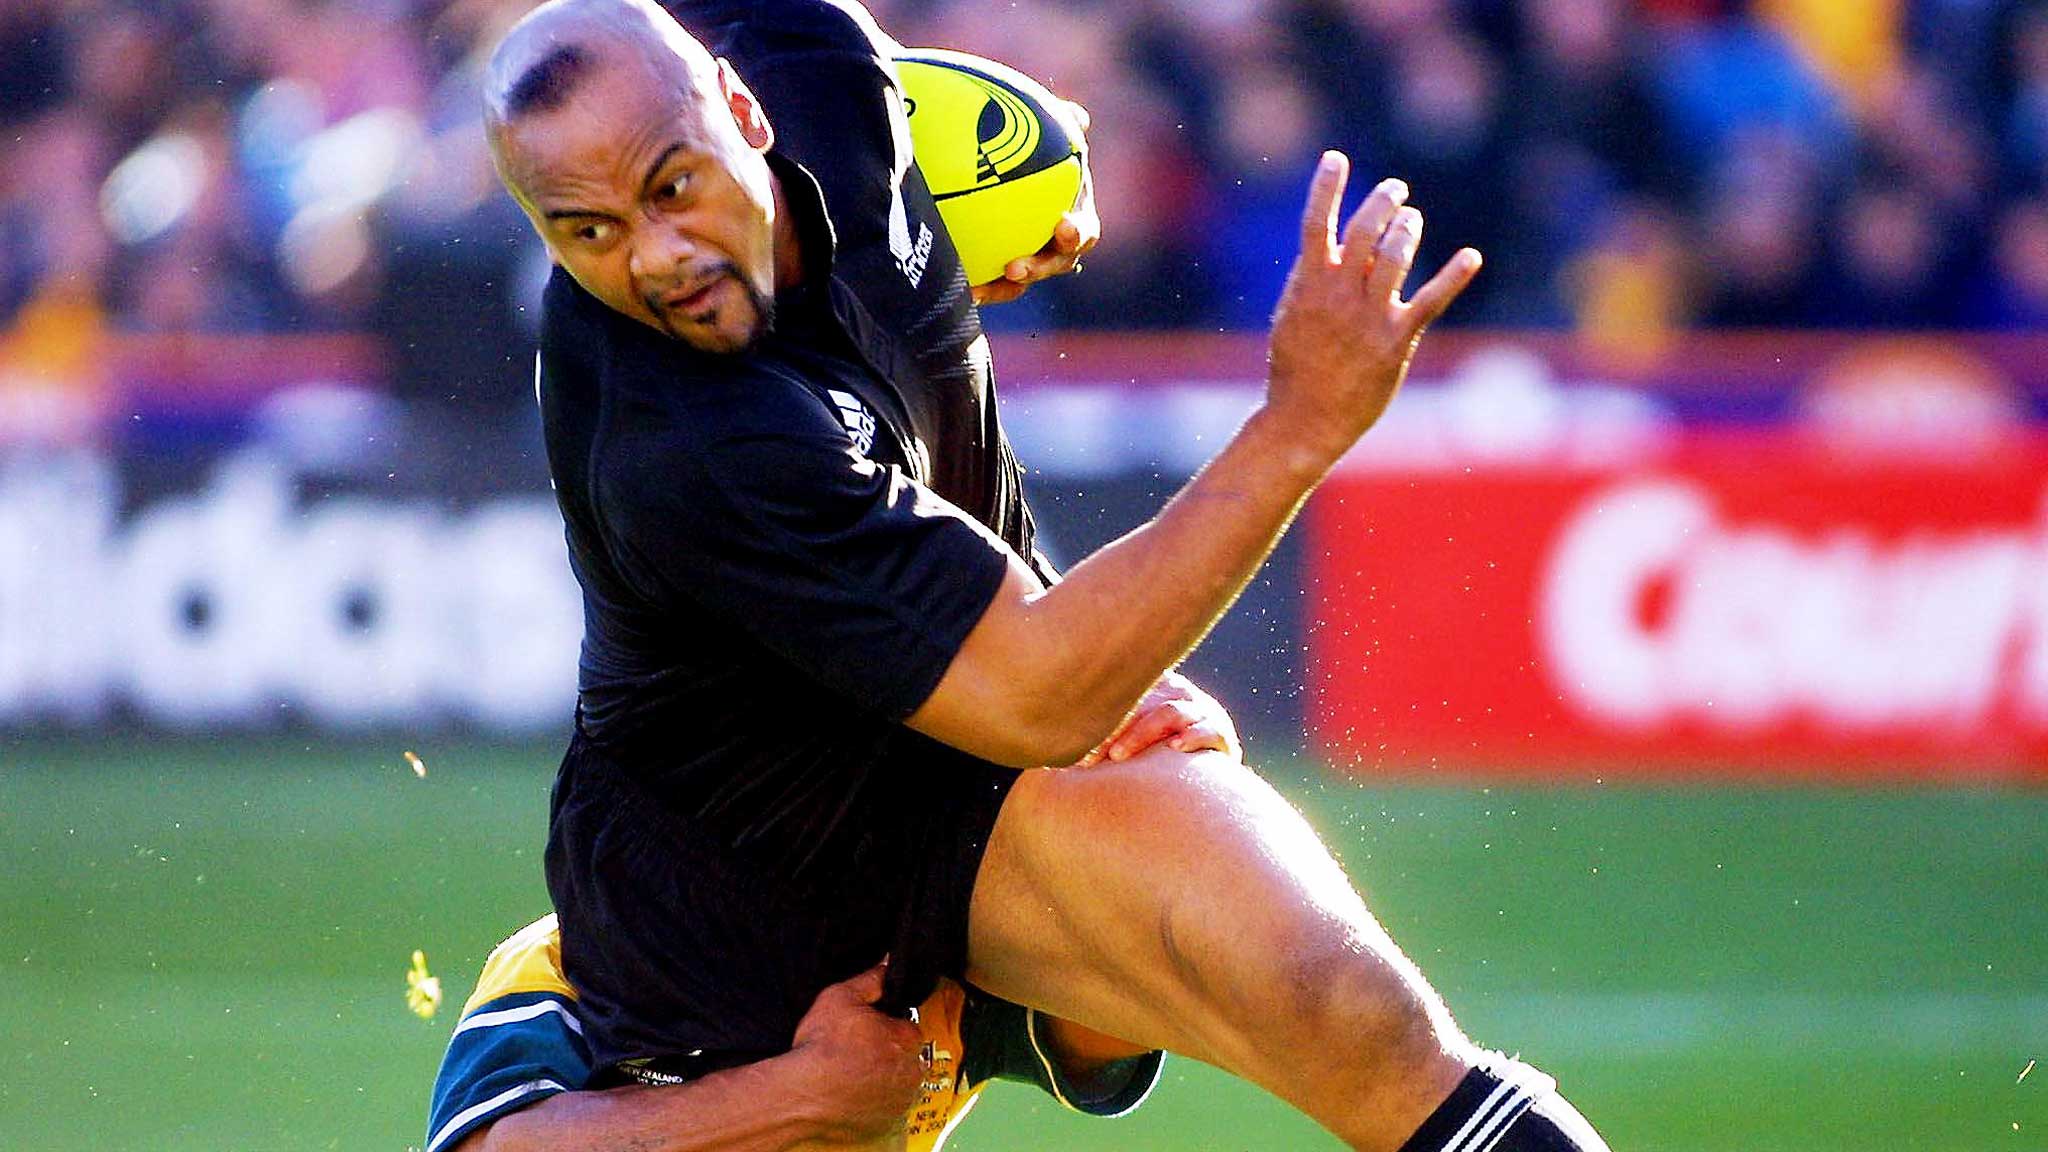 Jonah Lomu, New Zealand Rugby Great, 1975 2015